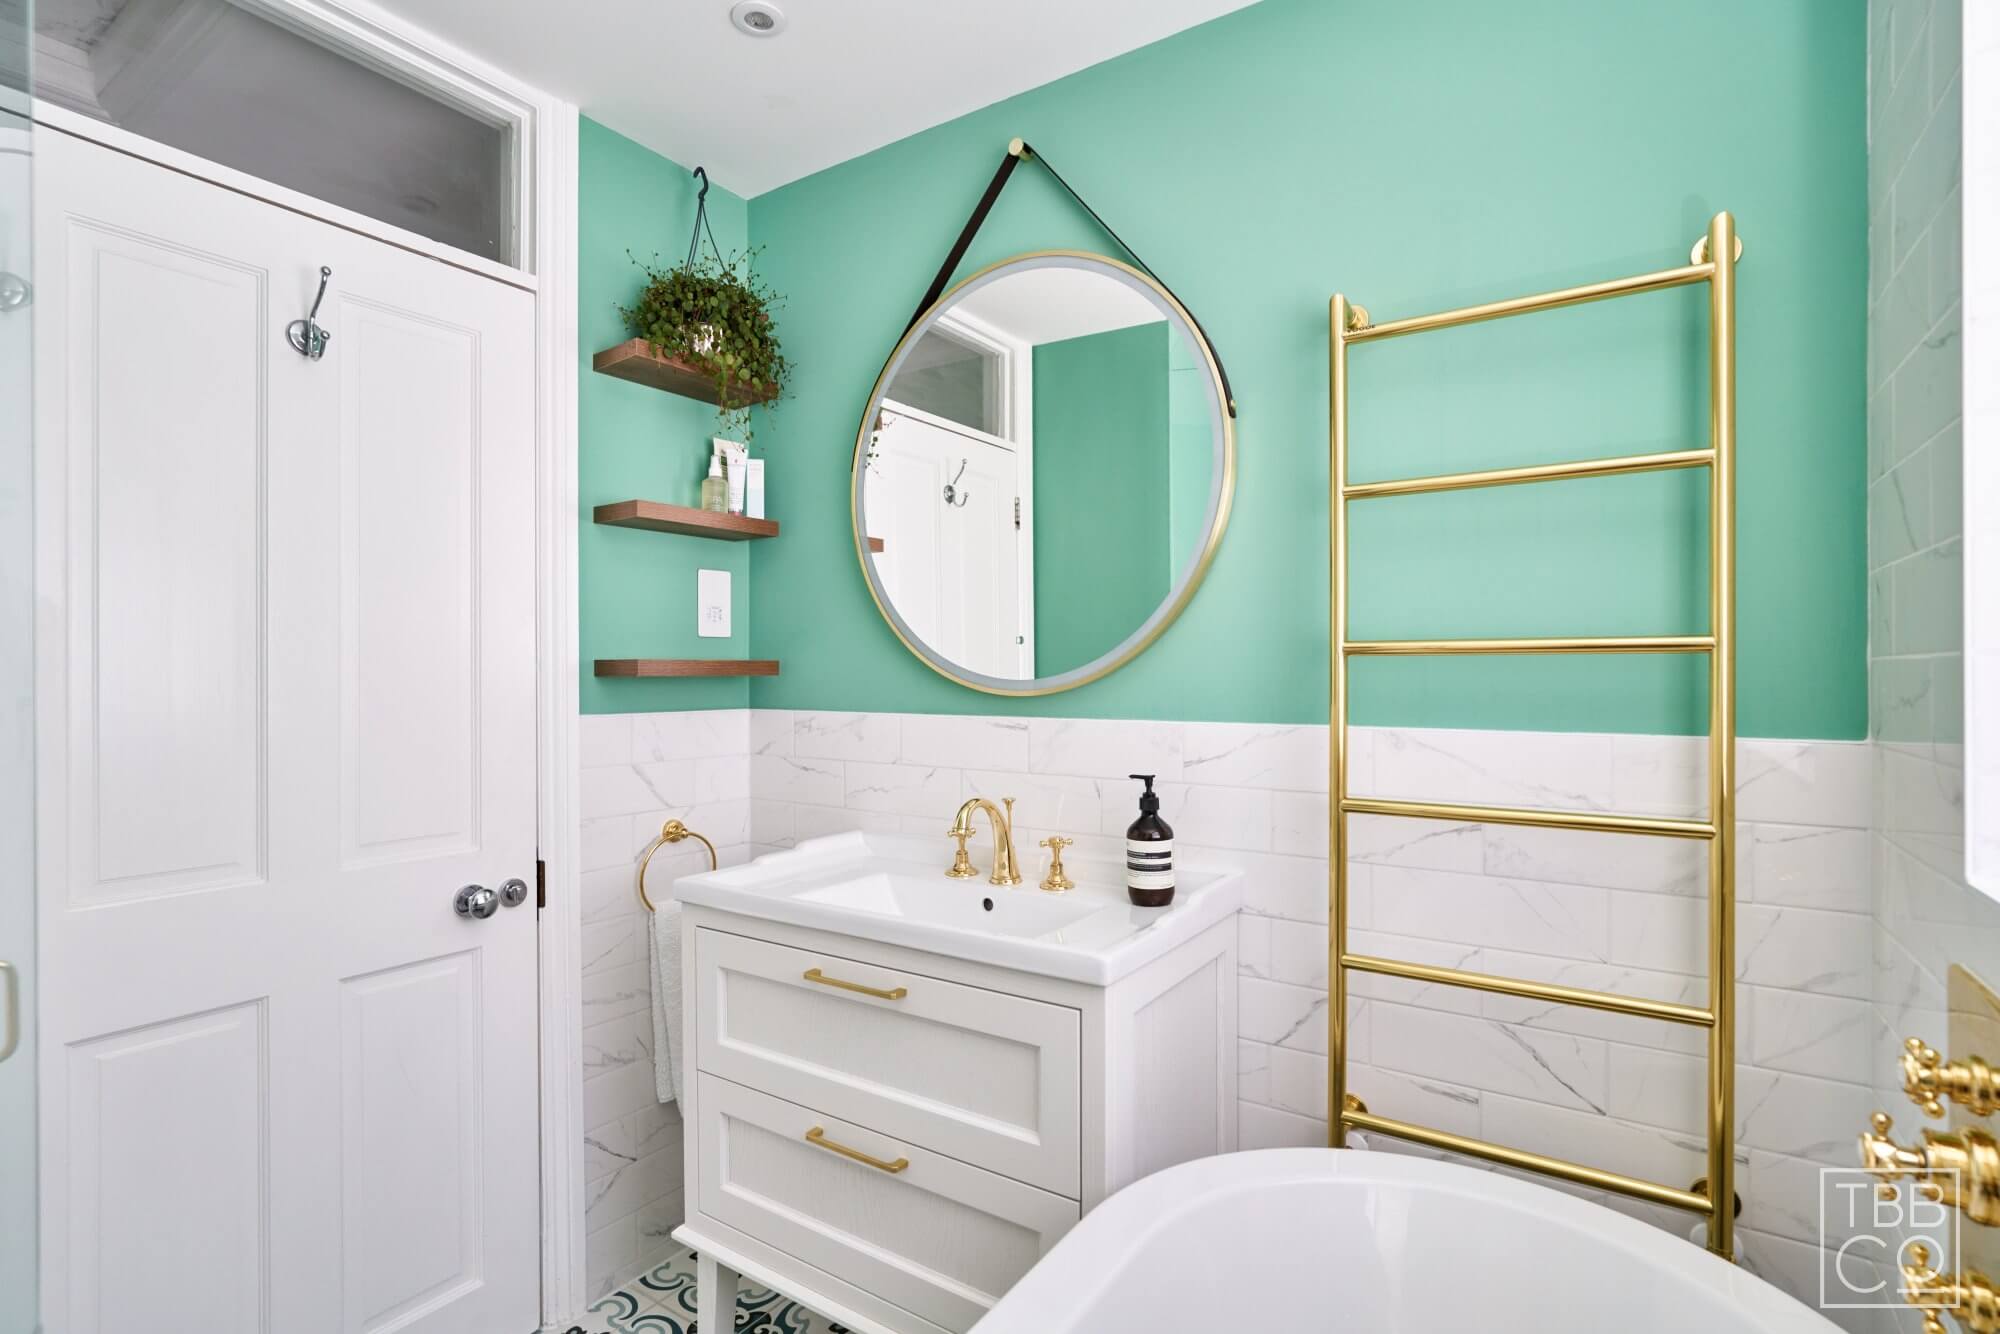 Floating Shelves and White Bathroom Vanity with Gold Handles